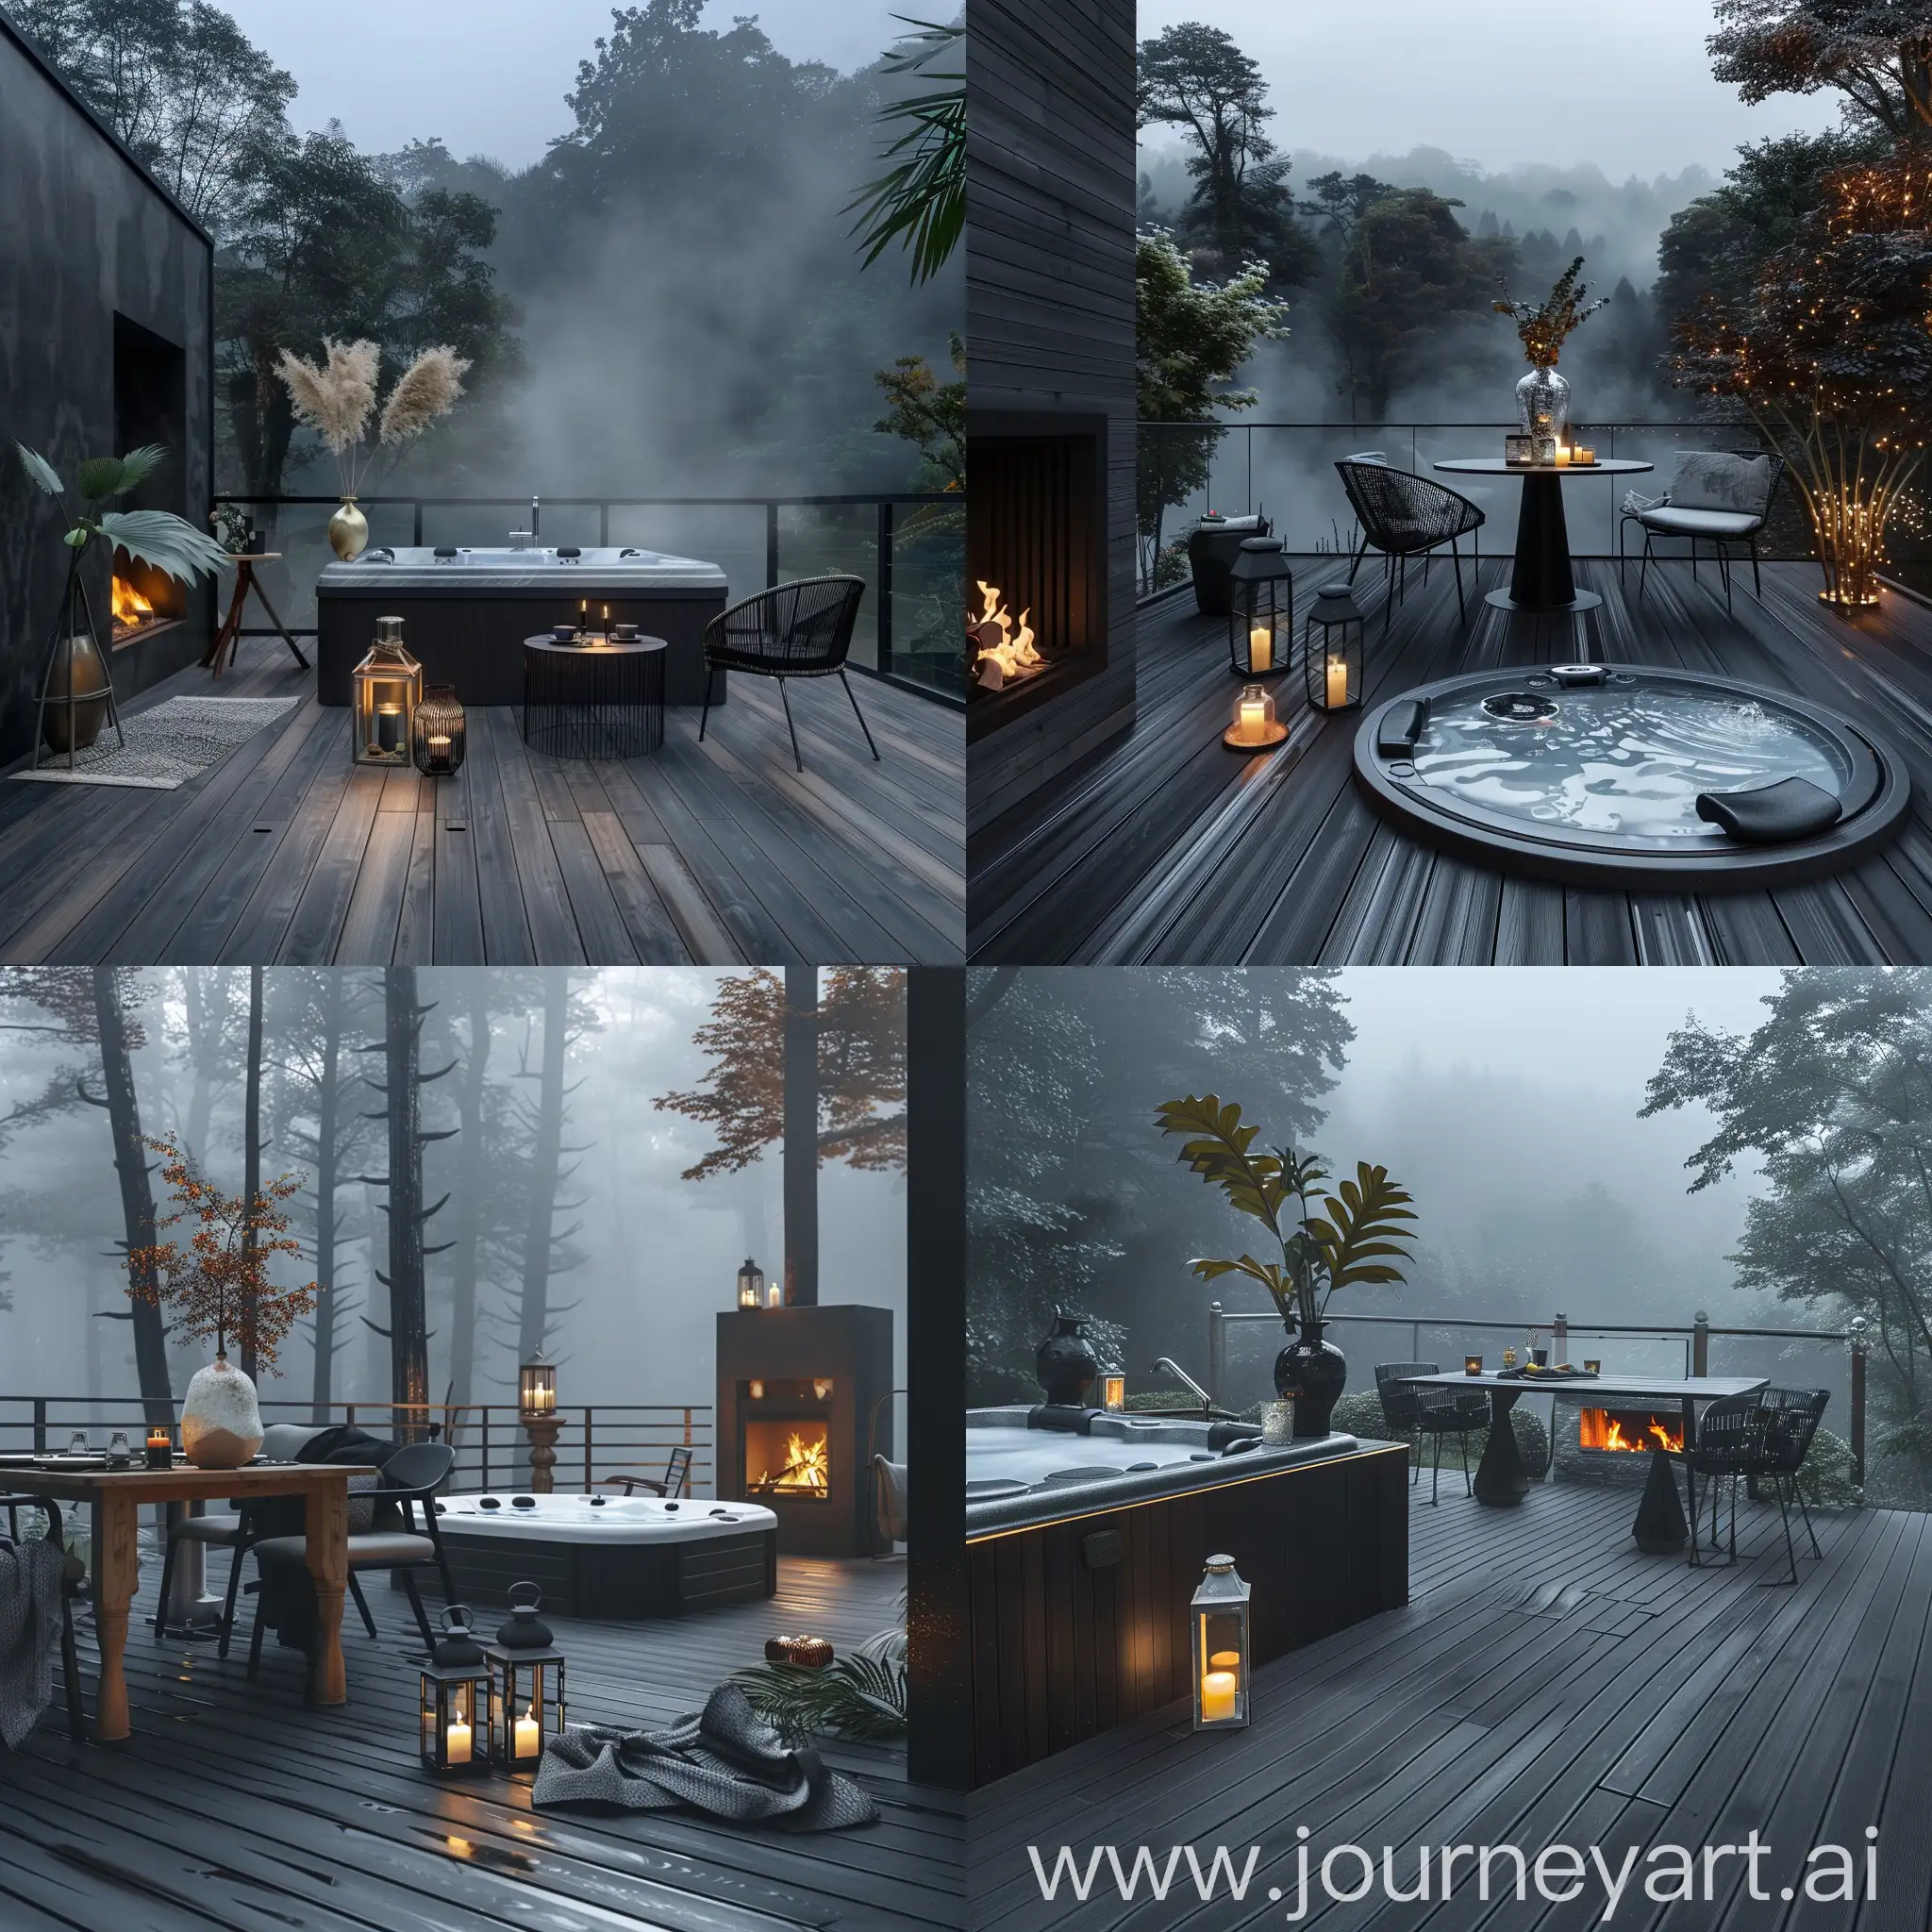 A black gray terrace, wooden laminate floor, soft lighting, lantern and vase, table and chair, hot water jacuzzi, decoration, electric fireplace, in the misty tropical forest, real photo